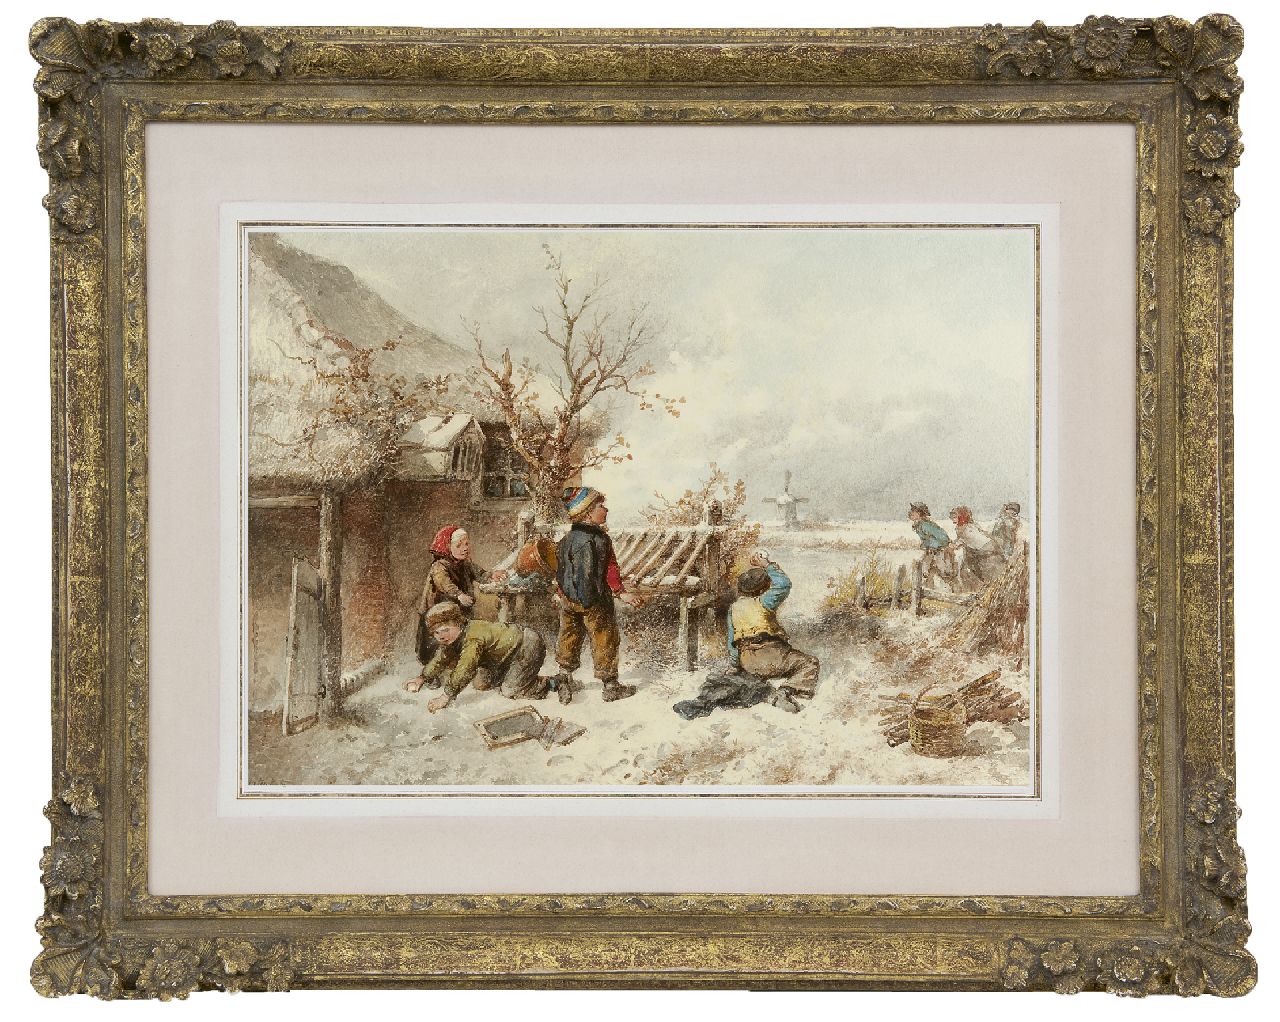 Kate J.M.H. ten | Johan 'Mari' Henri ten Kate | Watercolours and drawings offered for sale | The snowball fight and skaters, watercolour on paper 37.0 x 52.0 cm, signed l.l.